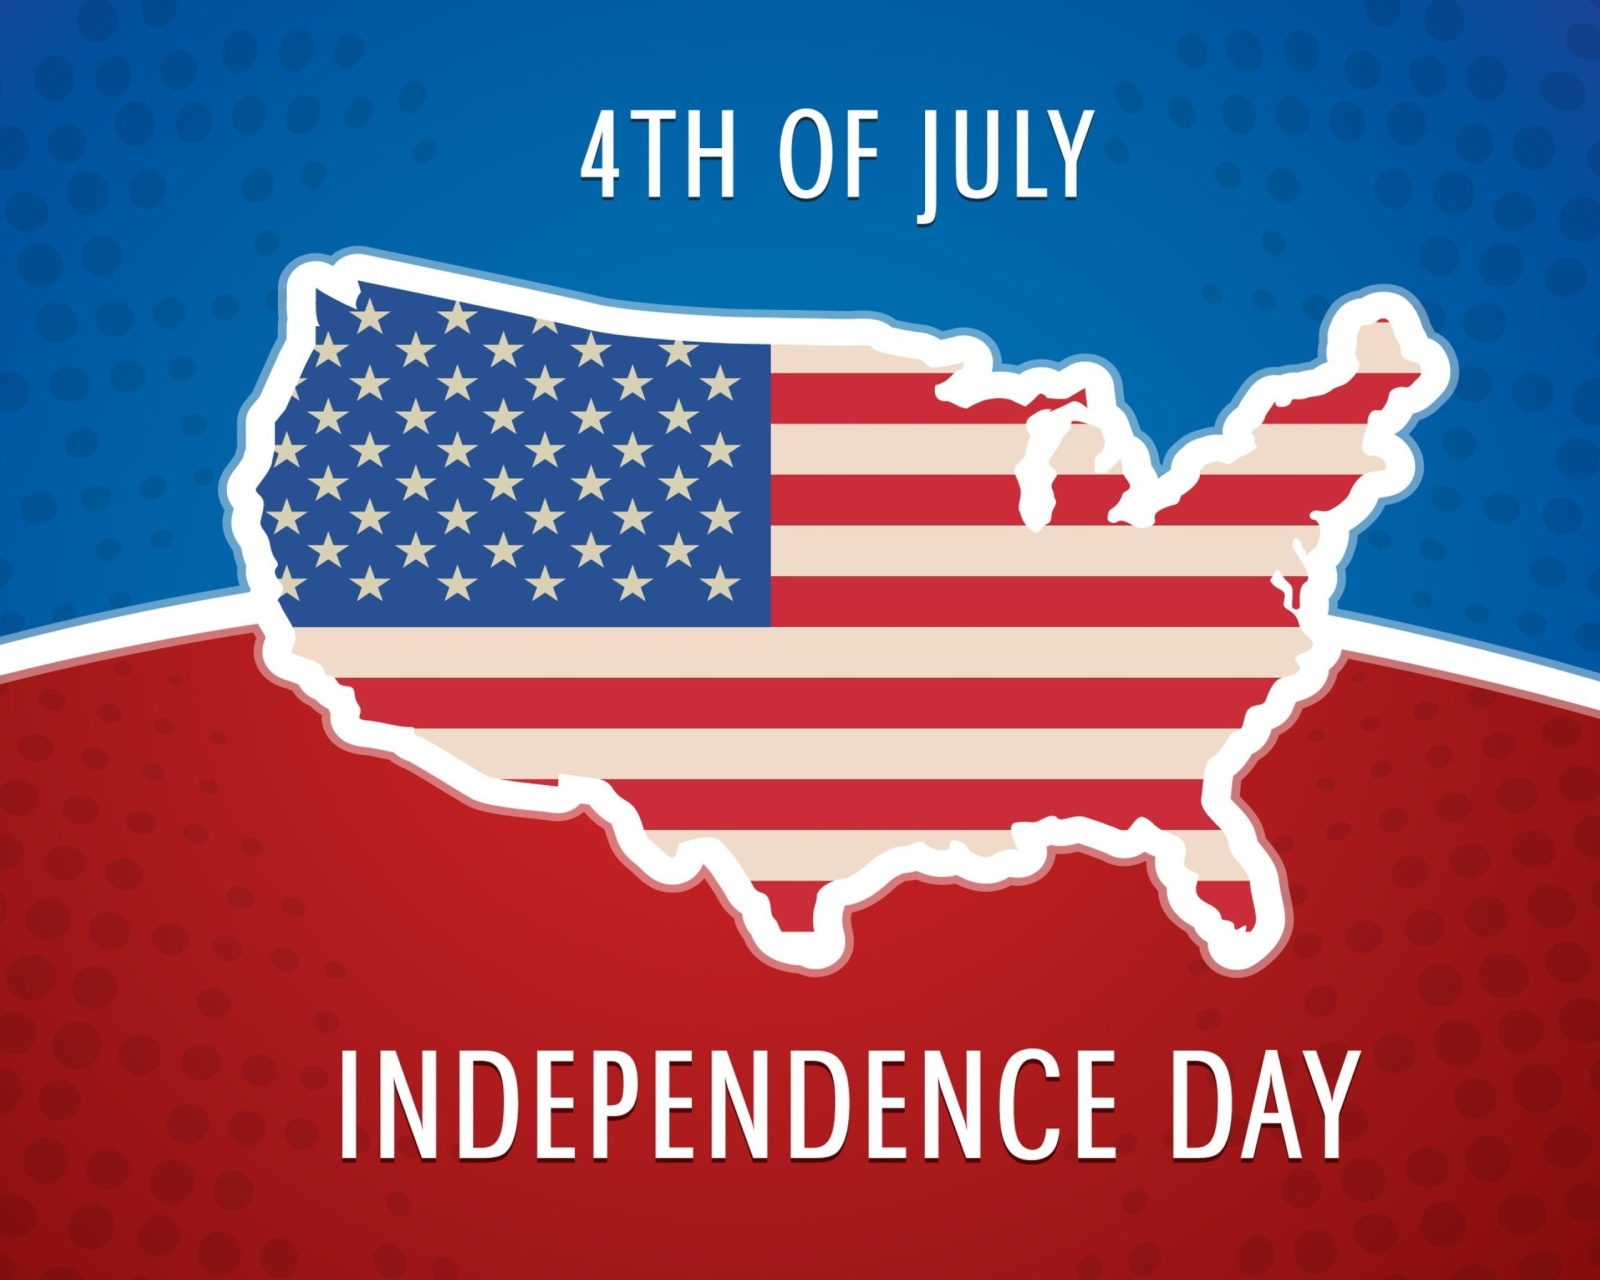 4th of July, Independence Day screenshot #1 1600x1280